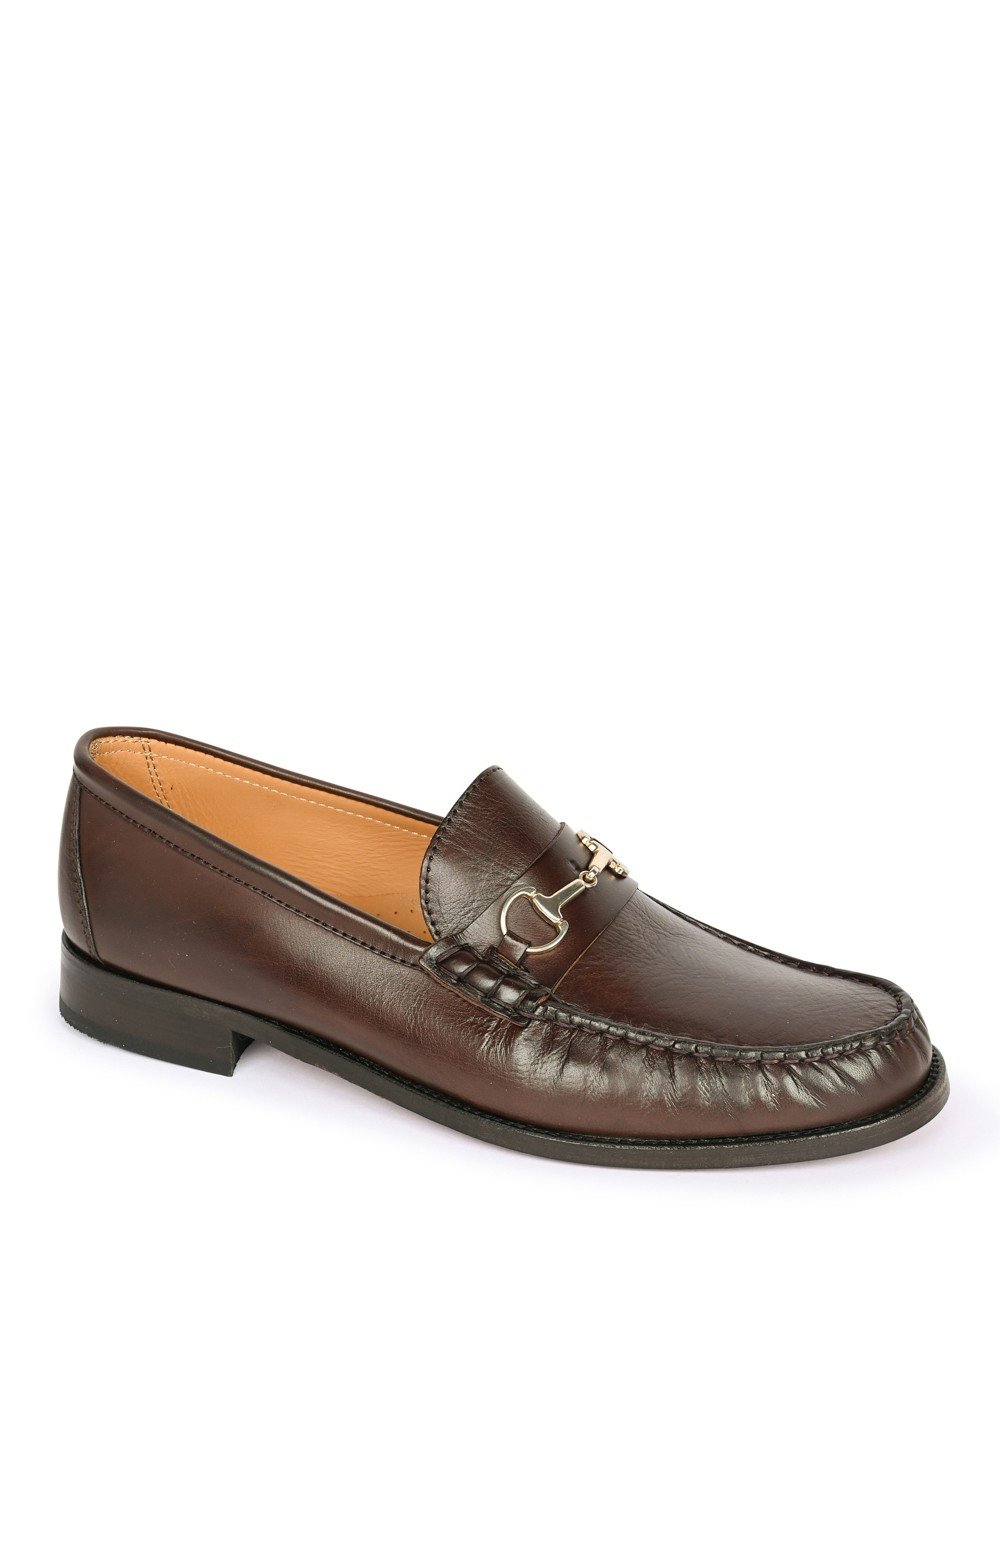 mens black snaffle loafers